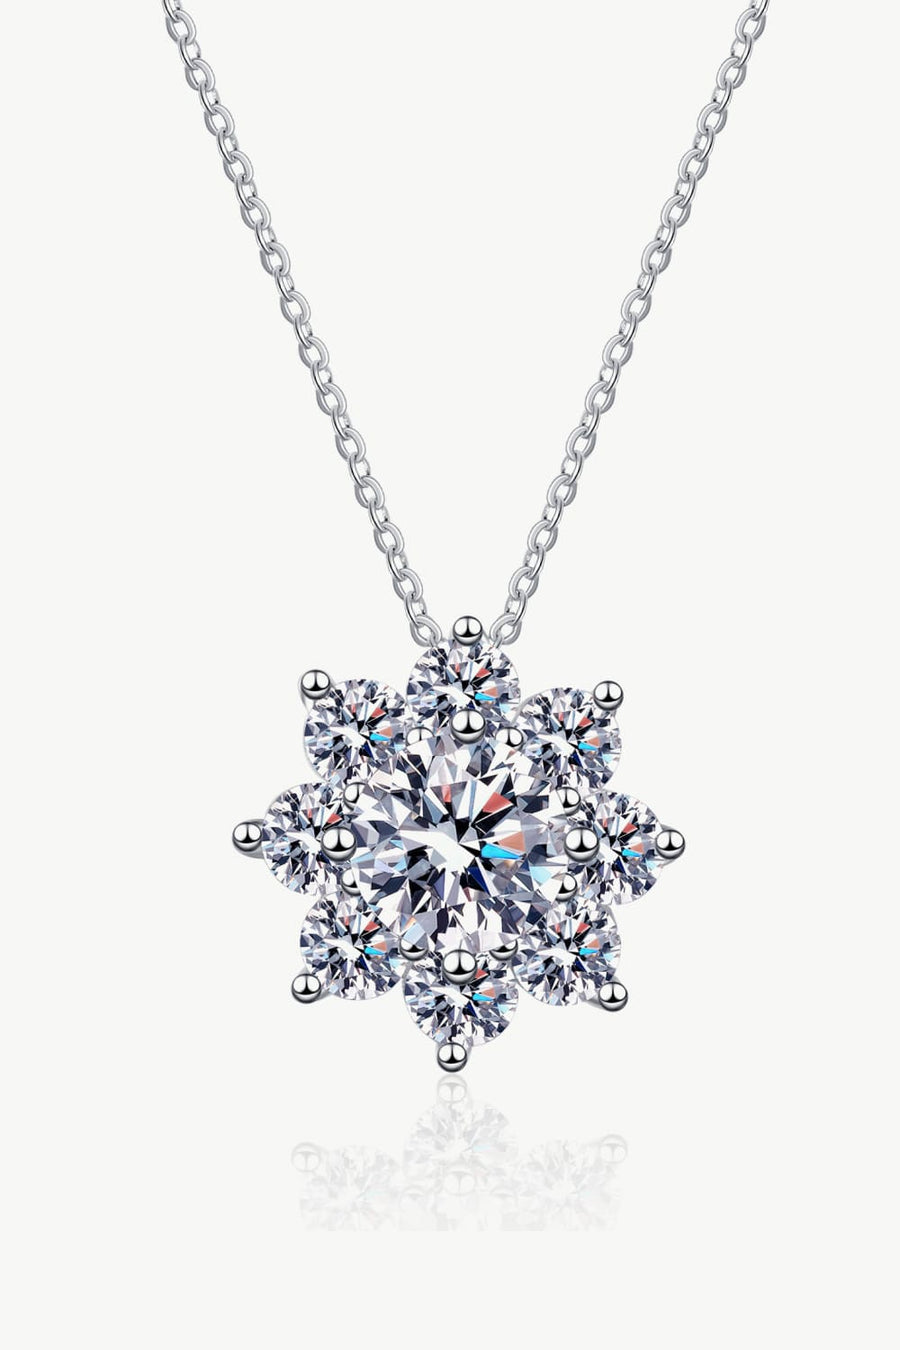 Best Diamond Necklace Jewelry Gifts for Women | 1 Carat Diamond Floral-Shaped Pendant Necklace | MASON New York